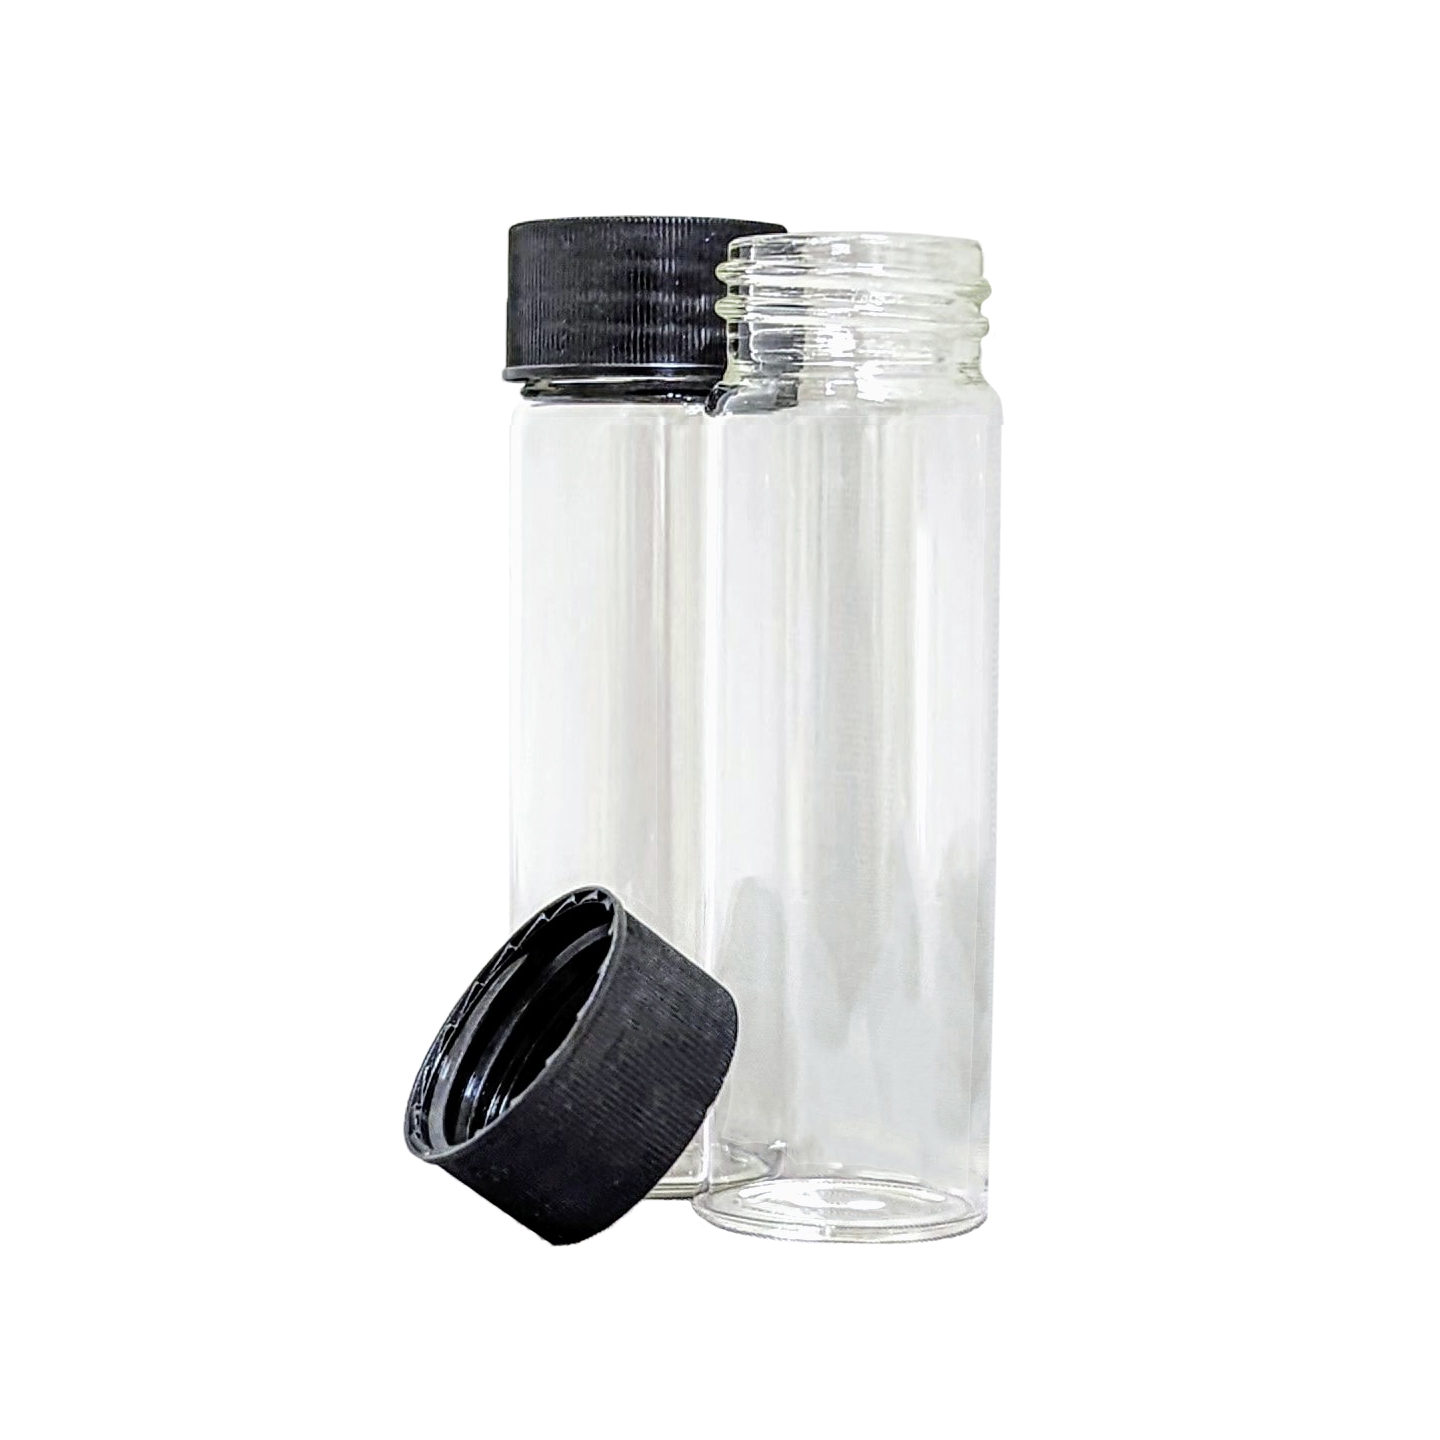 Vial, Screw Neck Vials, Tall Form, Capacity 10.5ml, With Unattached Polypropylene Closure